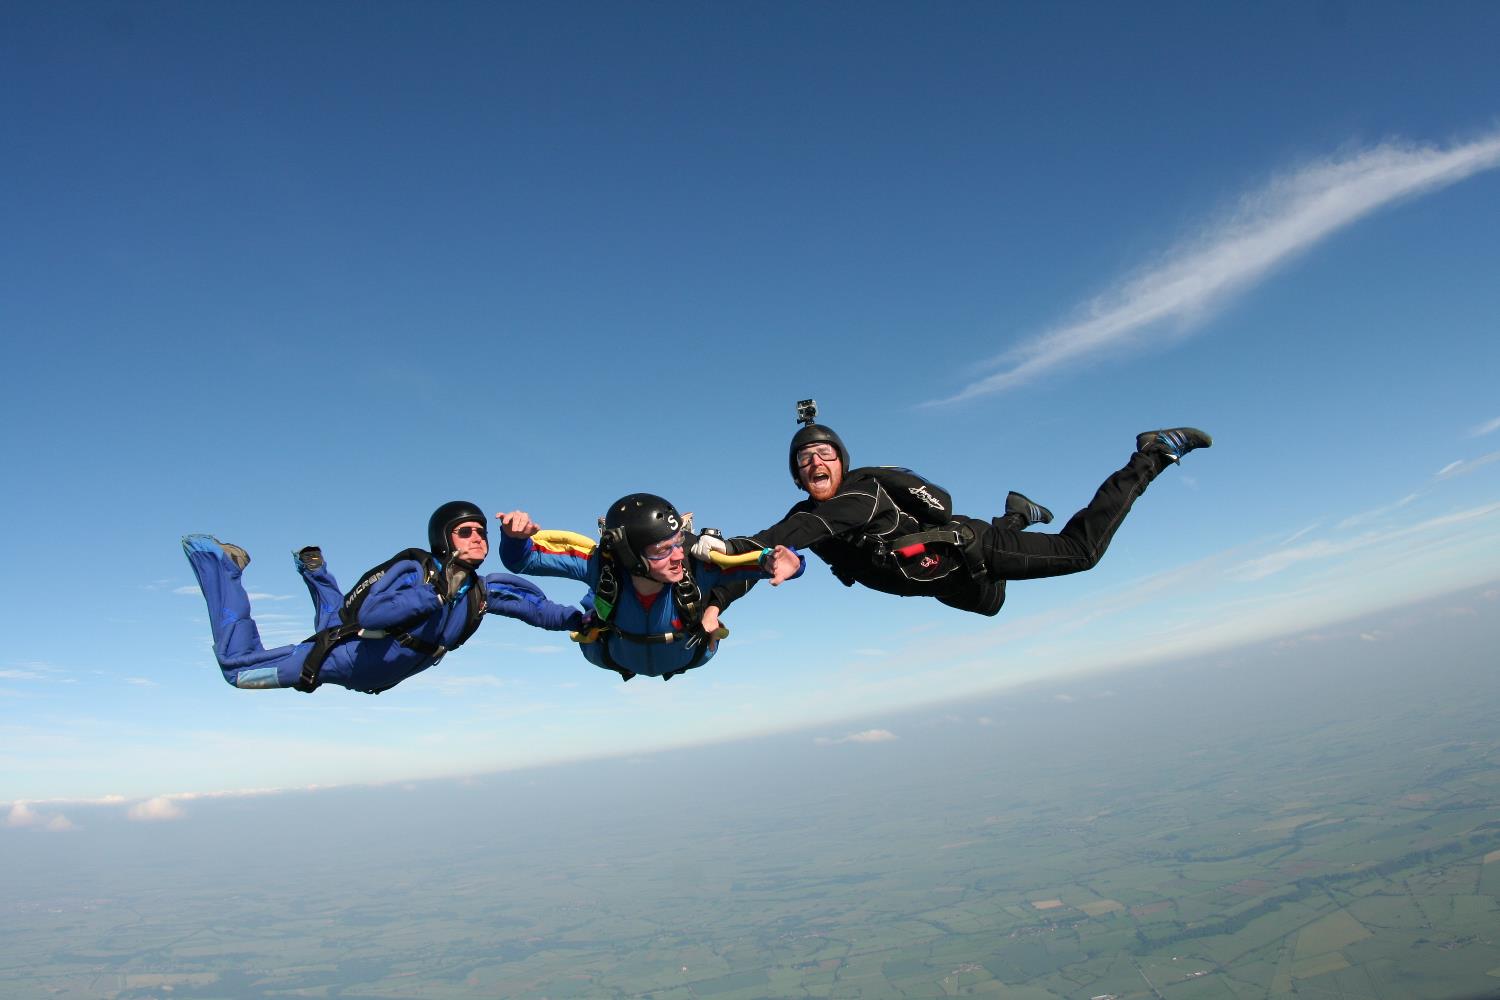 Accelerated free fall